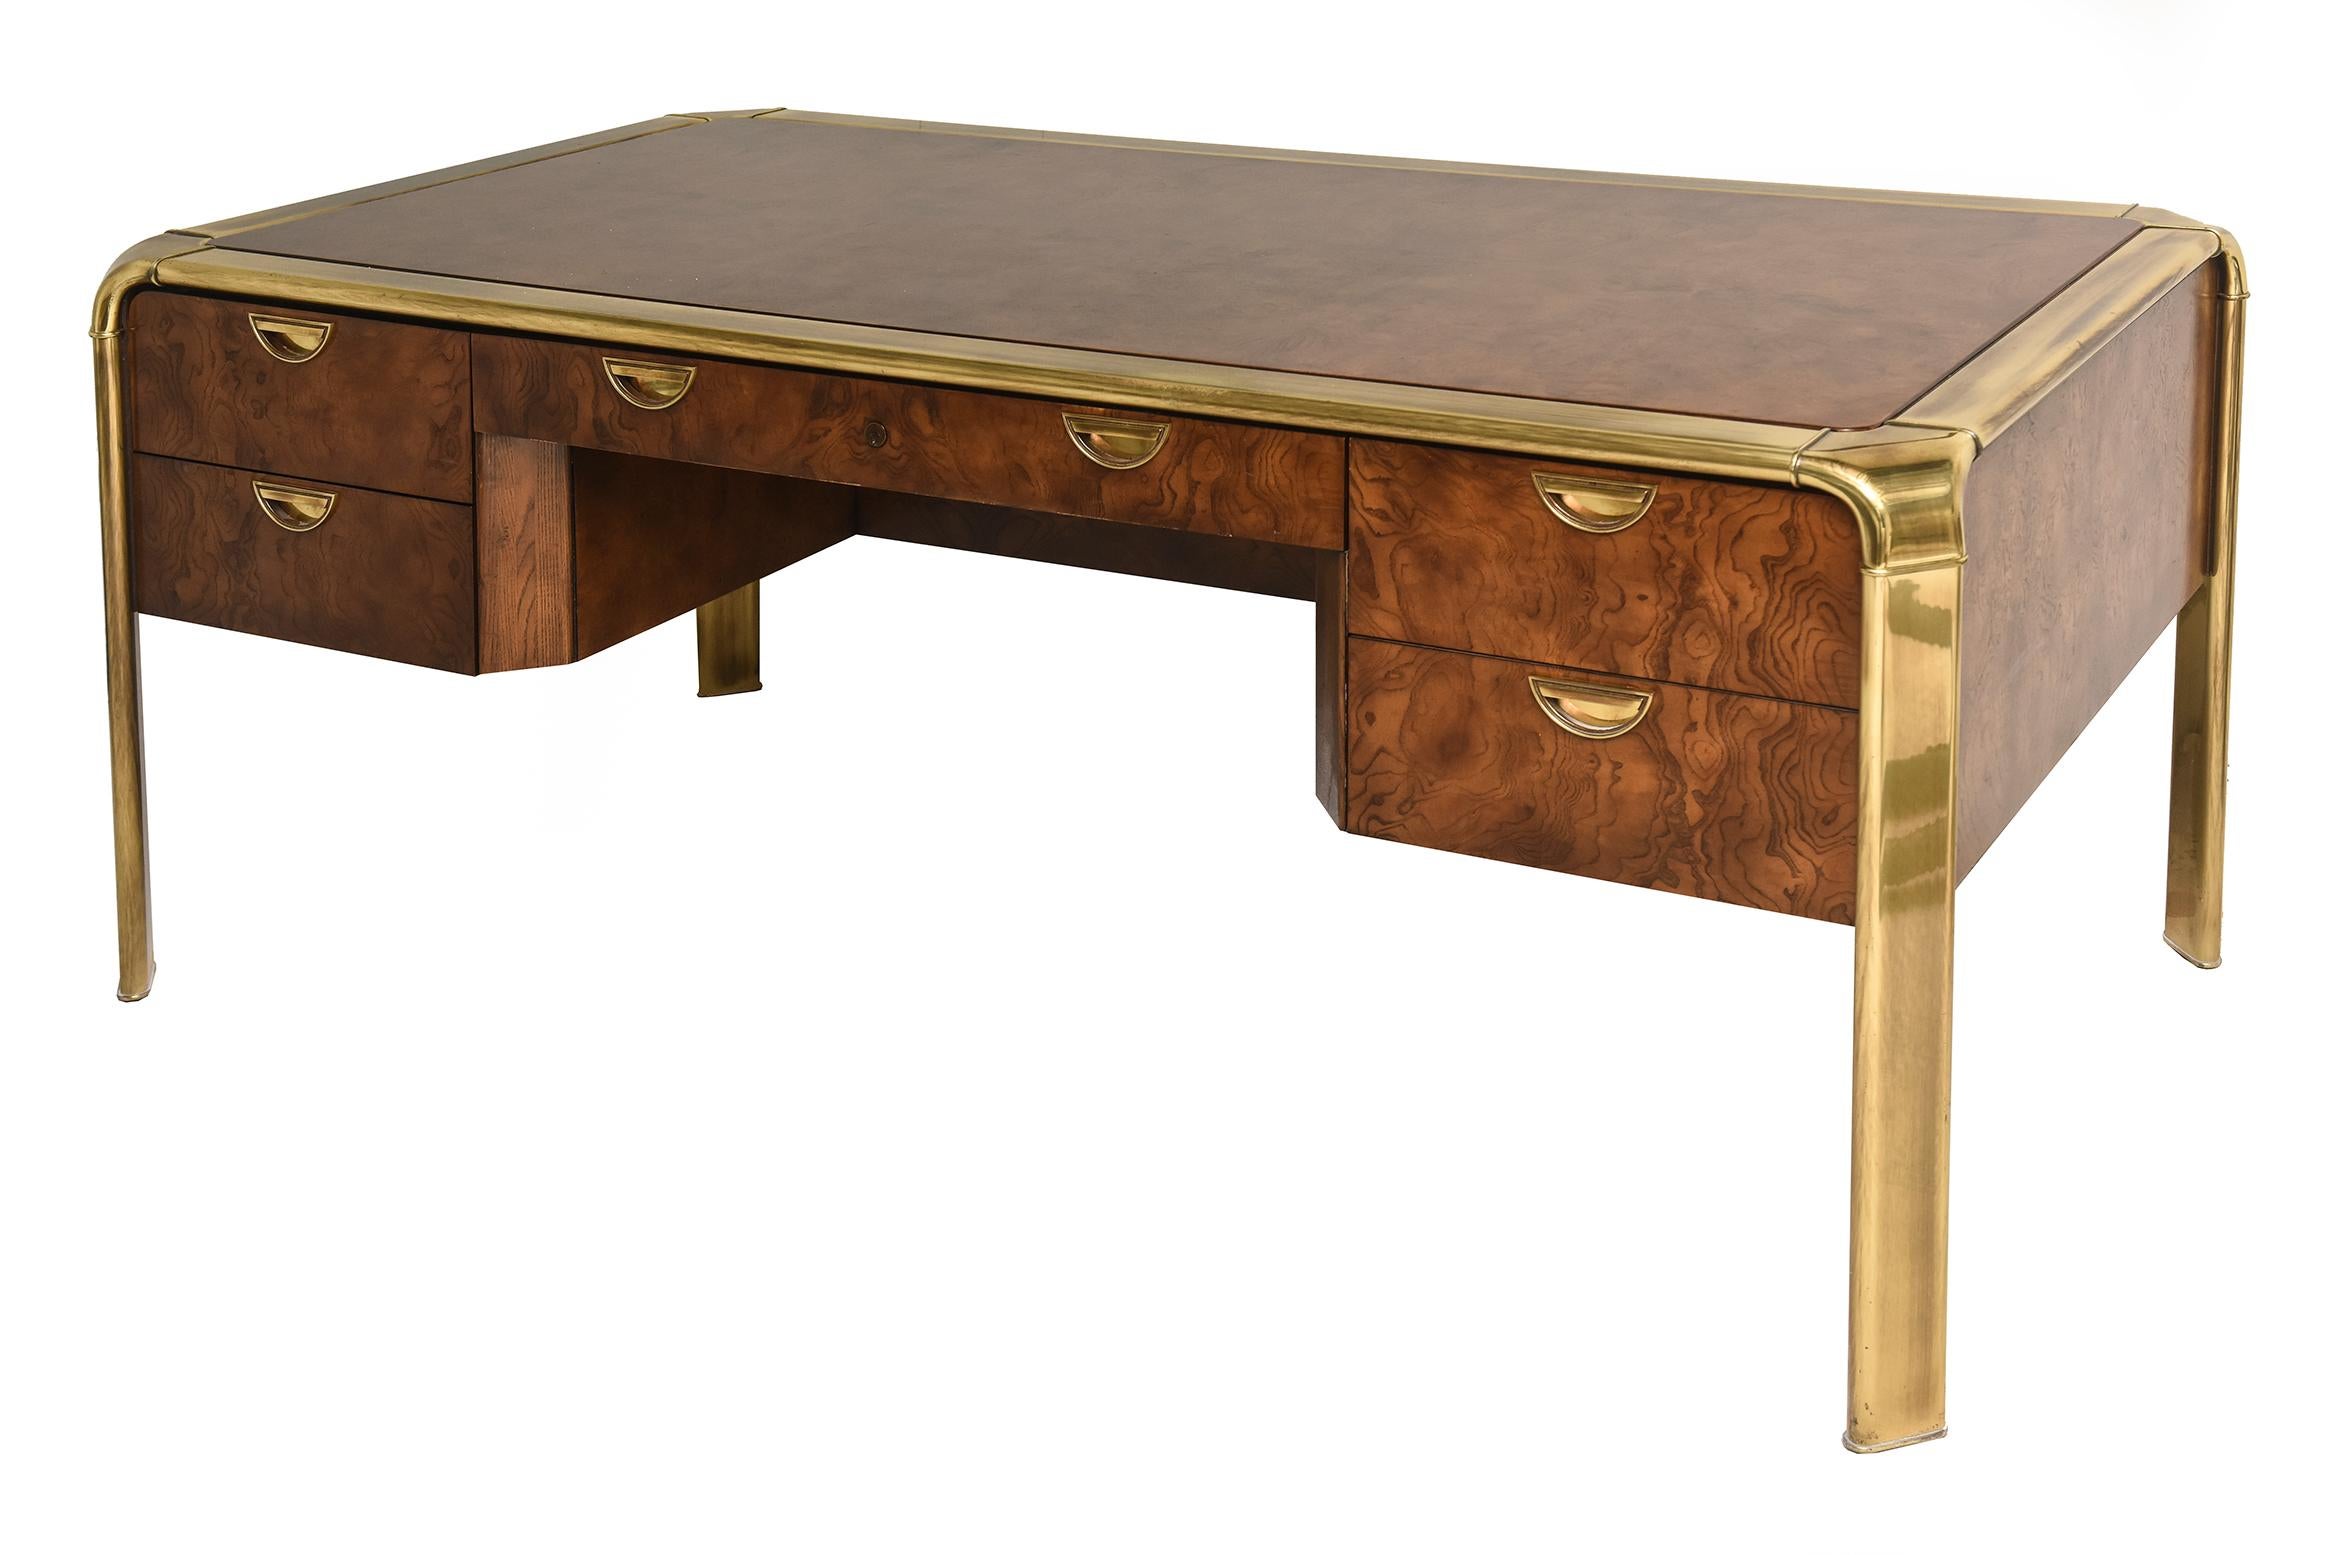 This classic desk / executive desk by John Widdicomb for Mastercraft is burled wood and original brass hardware and legs. It is from the 1970s. It has 3 drawers; 2 on one side and 1 large deep drawer on the right. It has a front drawer in the